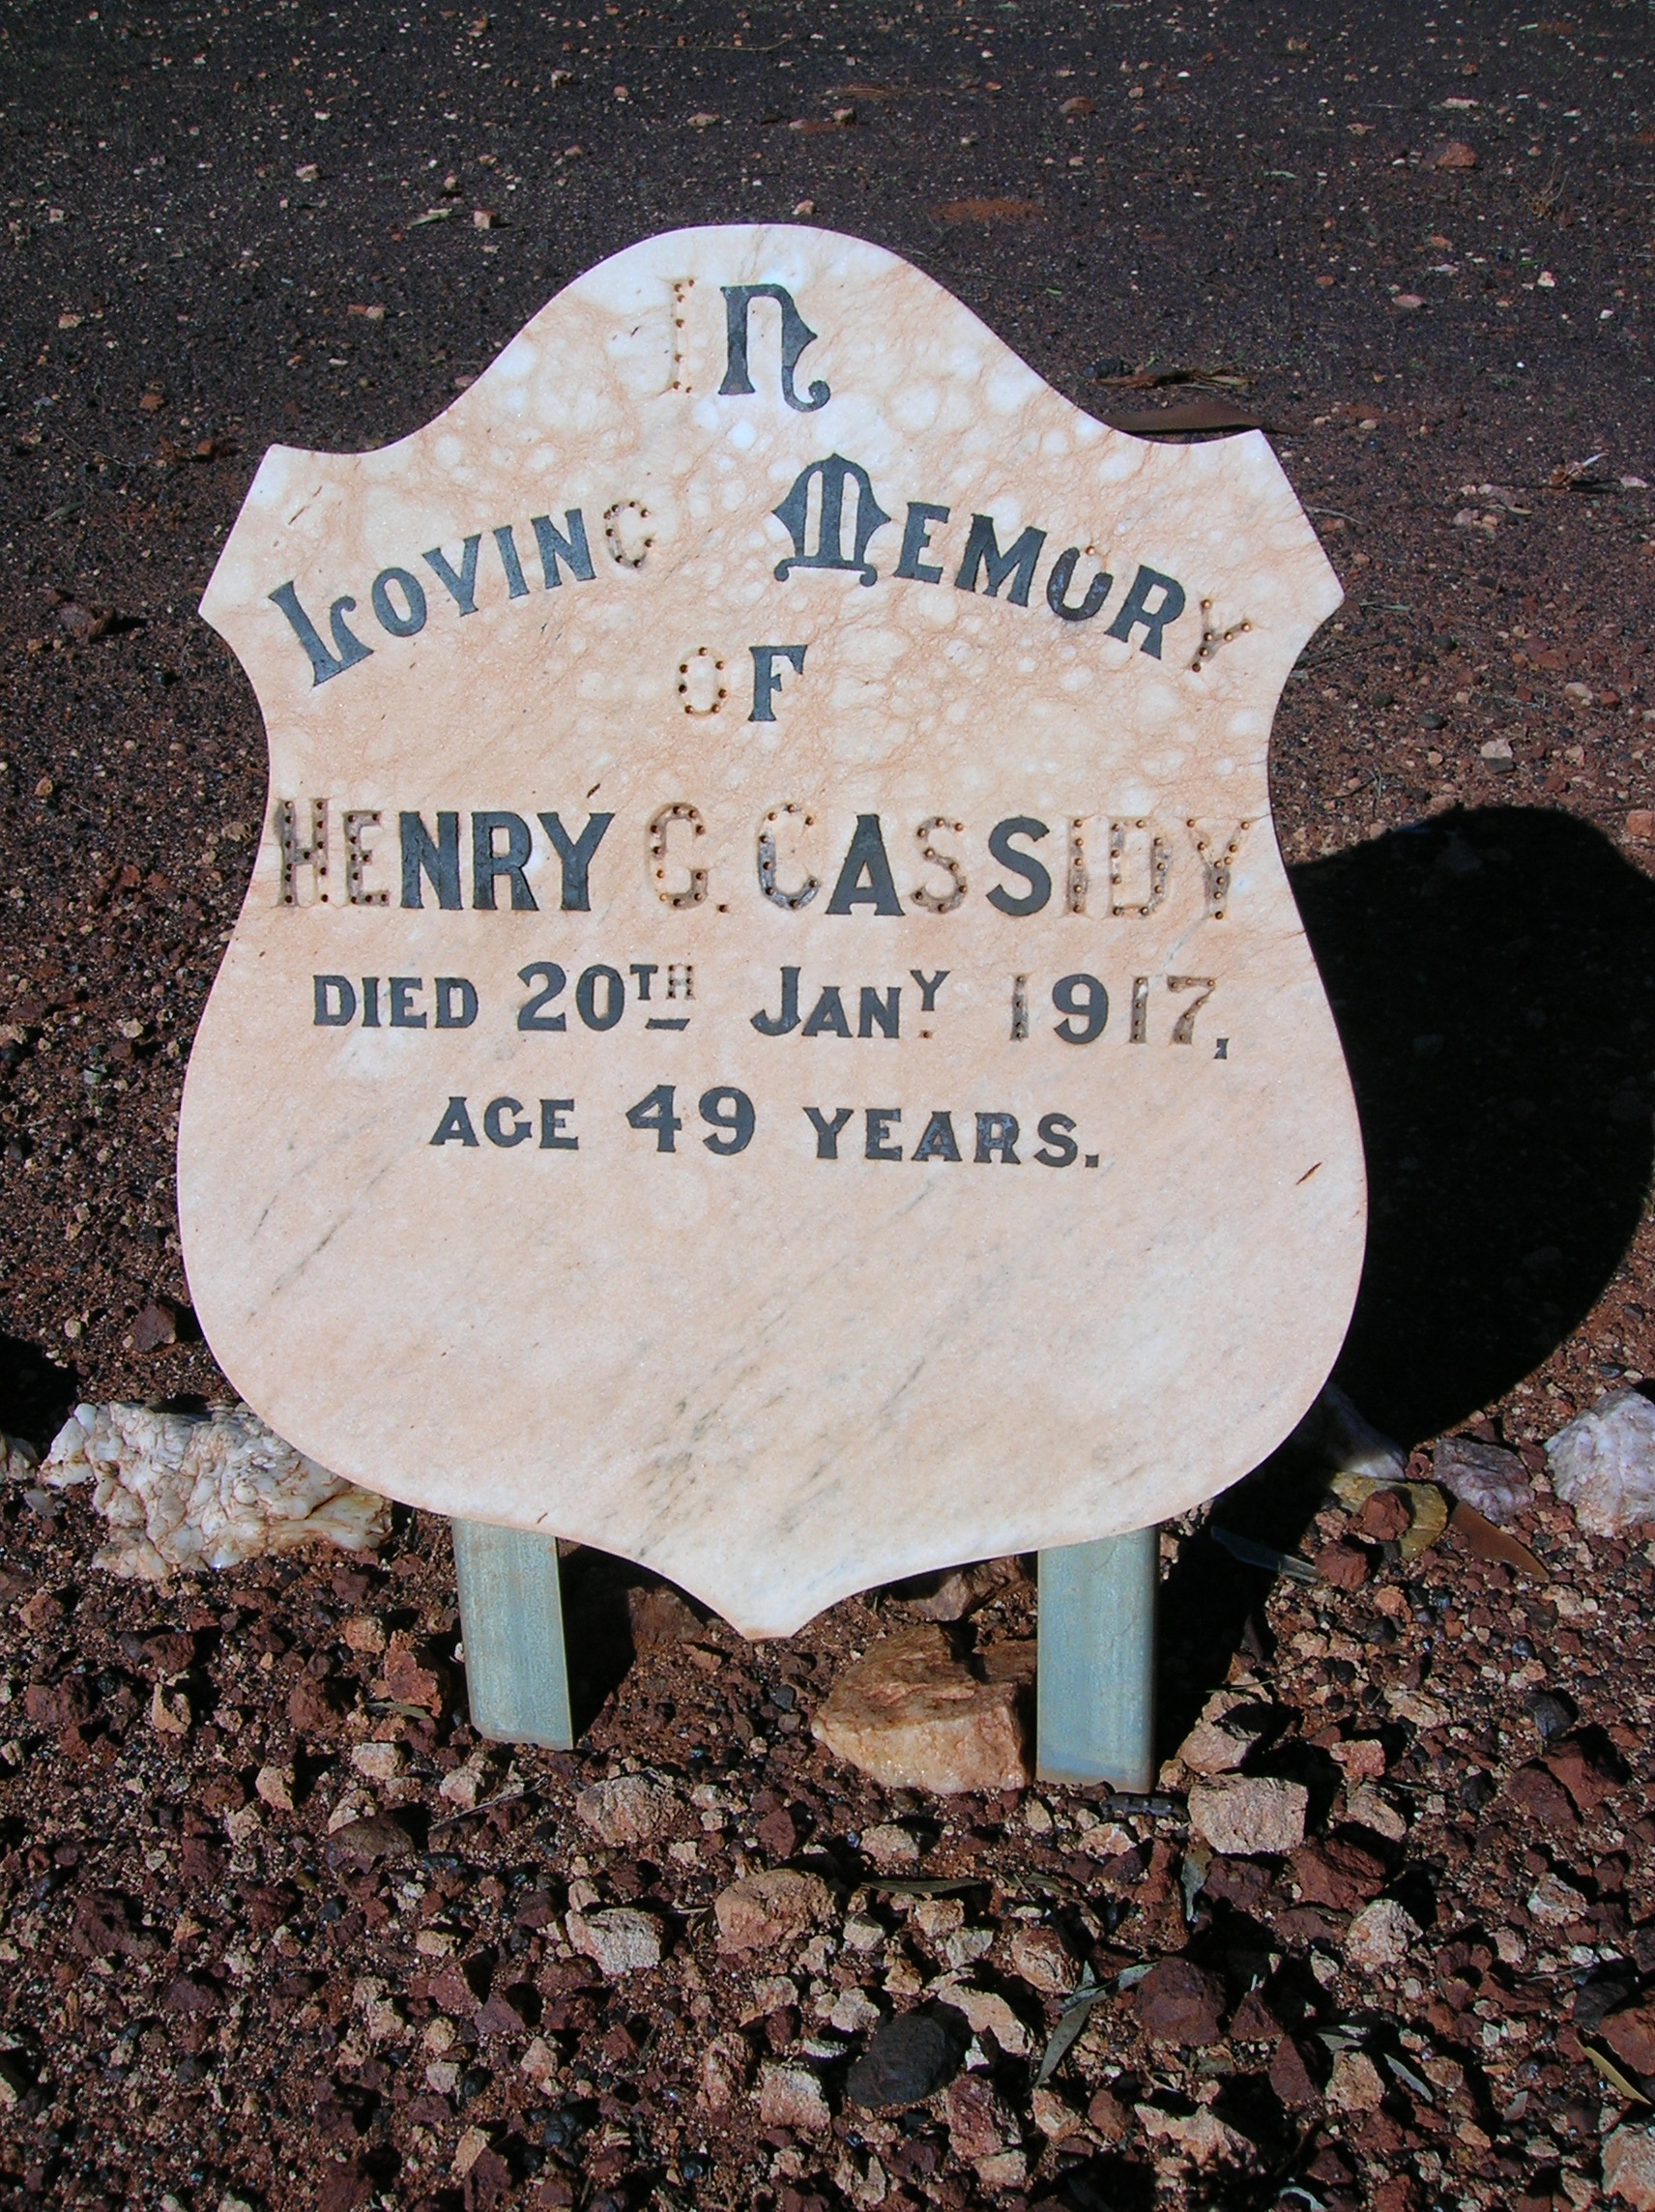 This is a photograph of the headstone for Henry CASSIDY